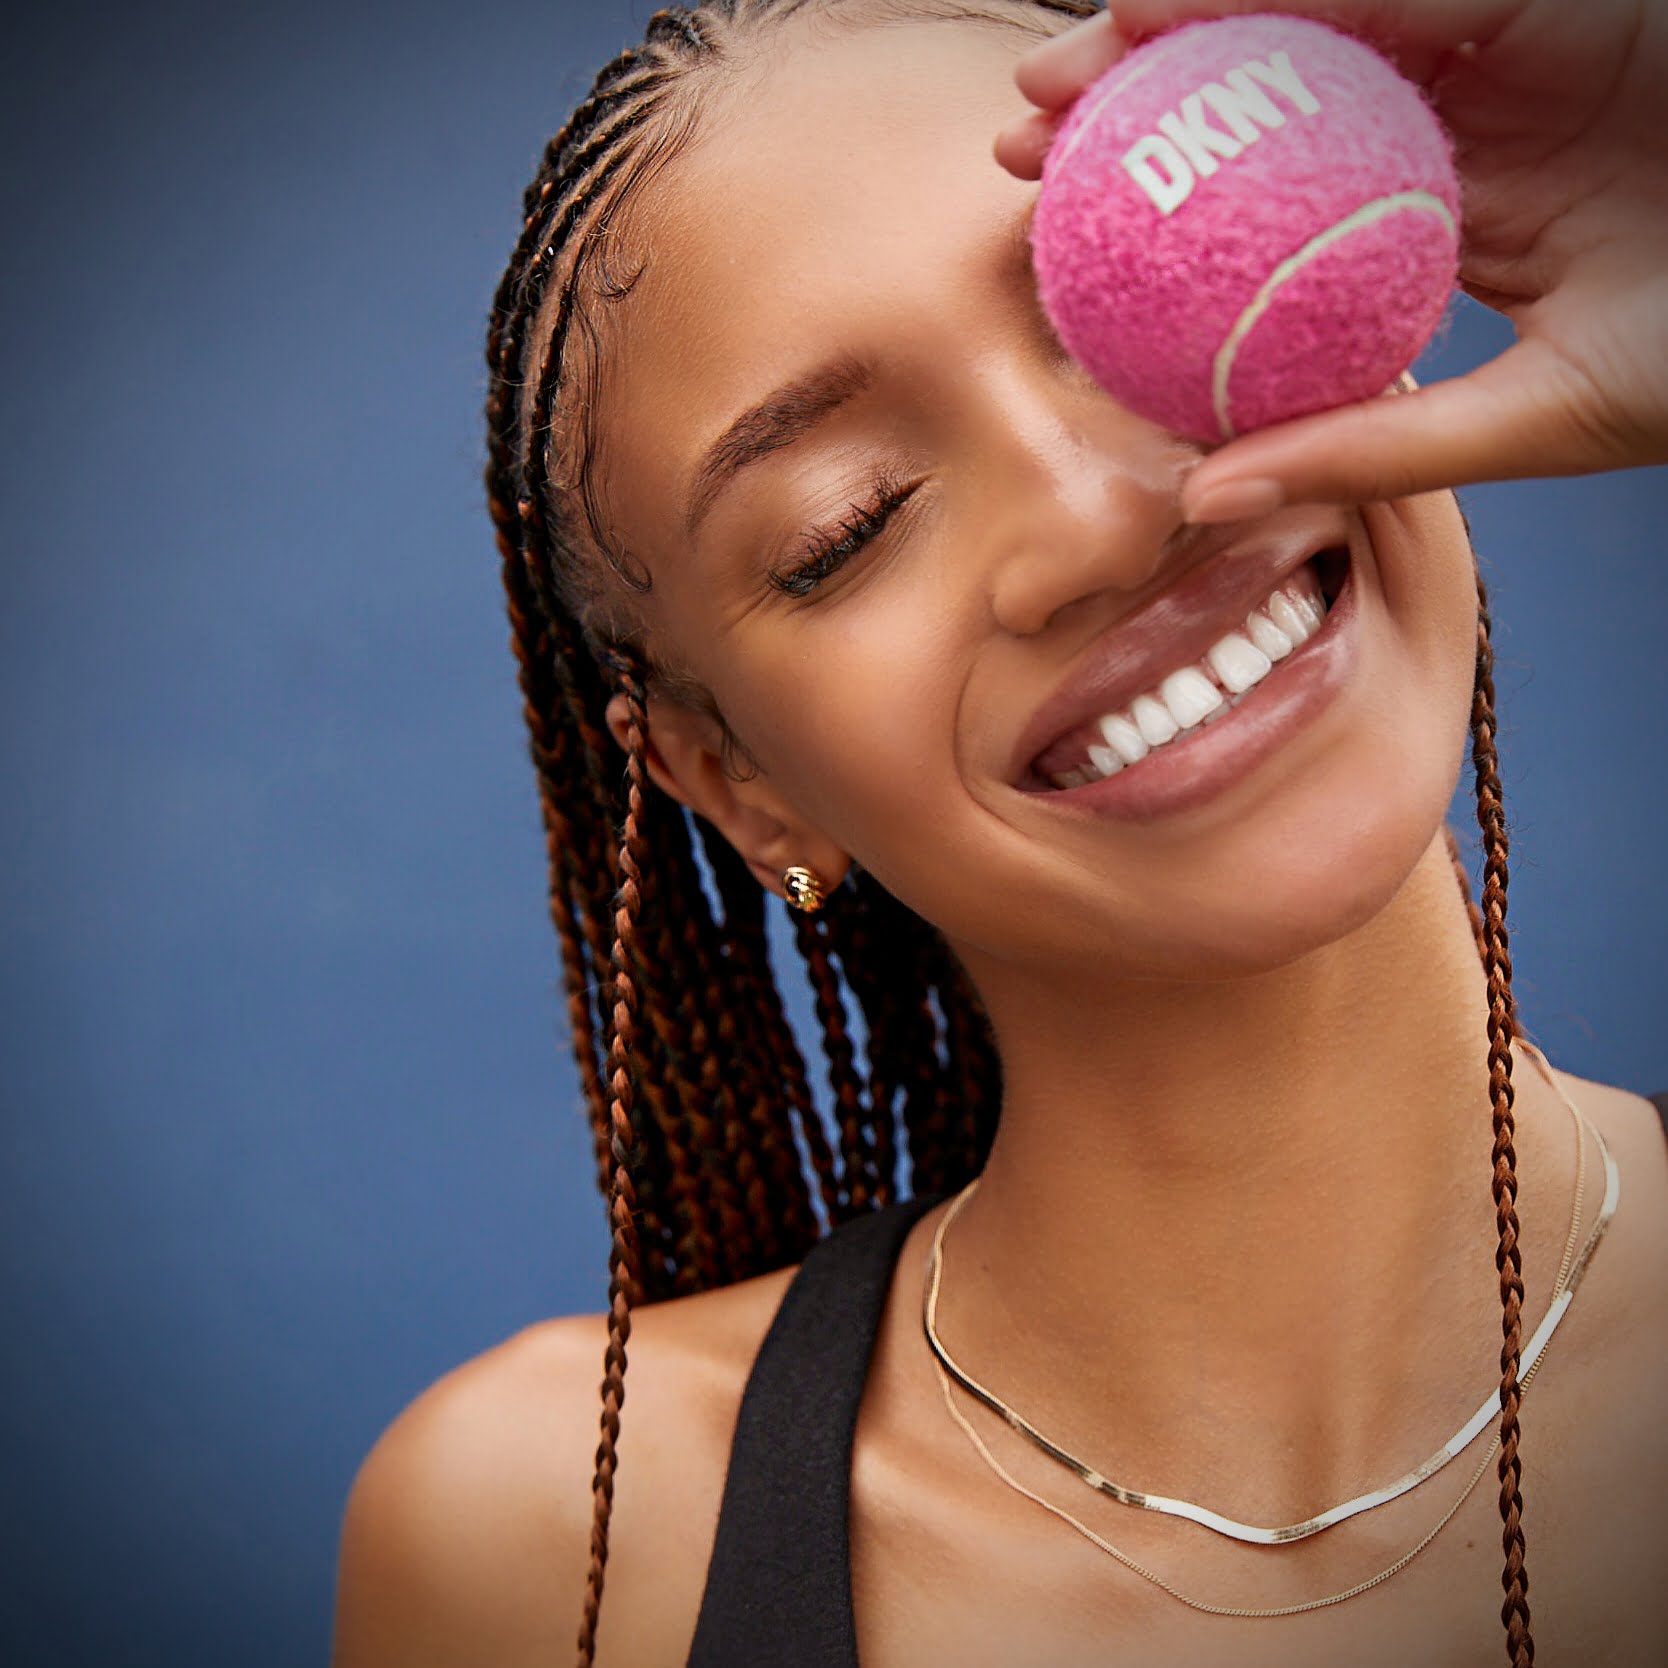 DKNY Sport releases tennis collection via 360 MAGAZINE.